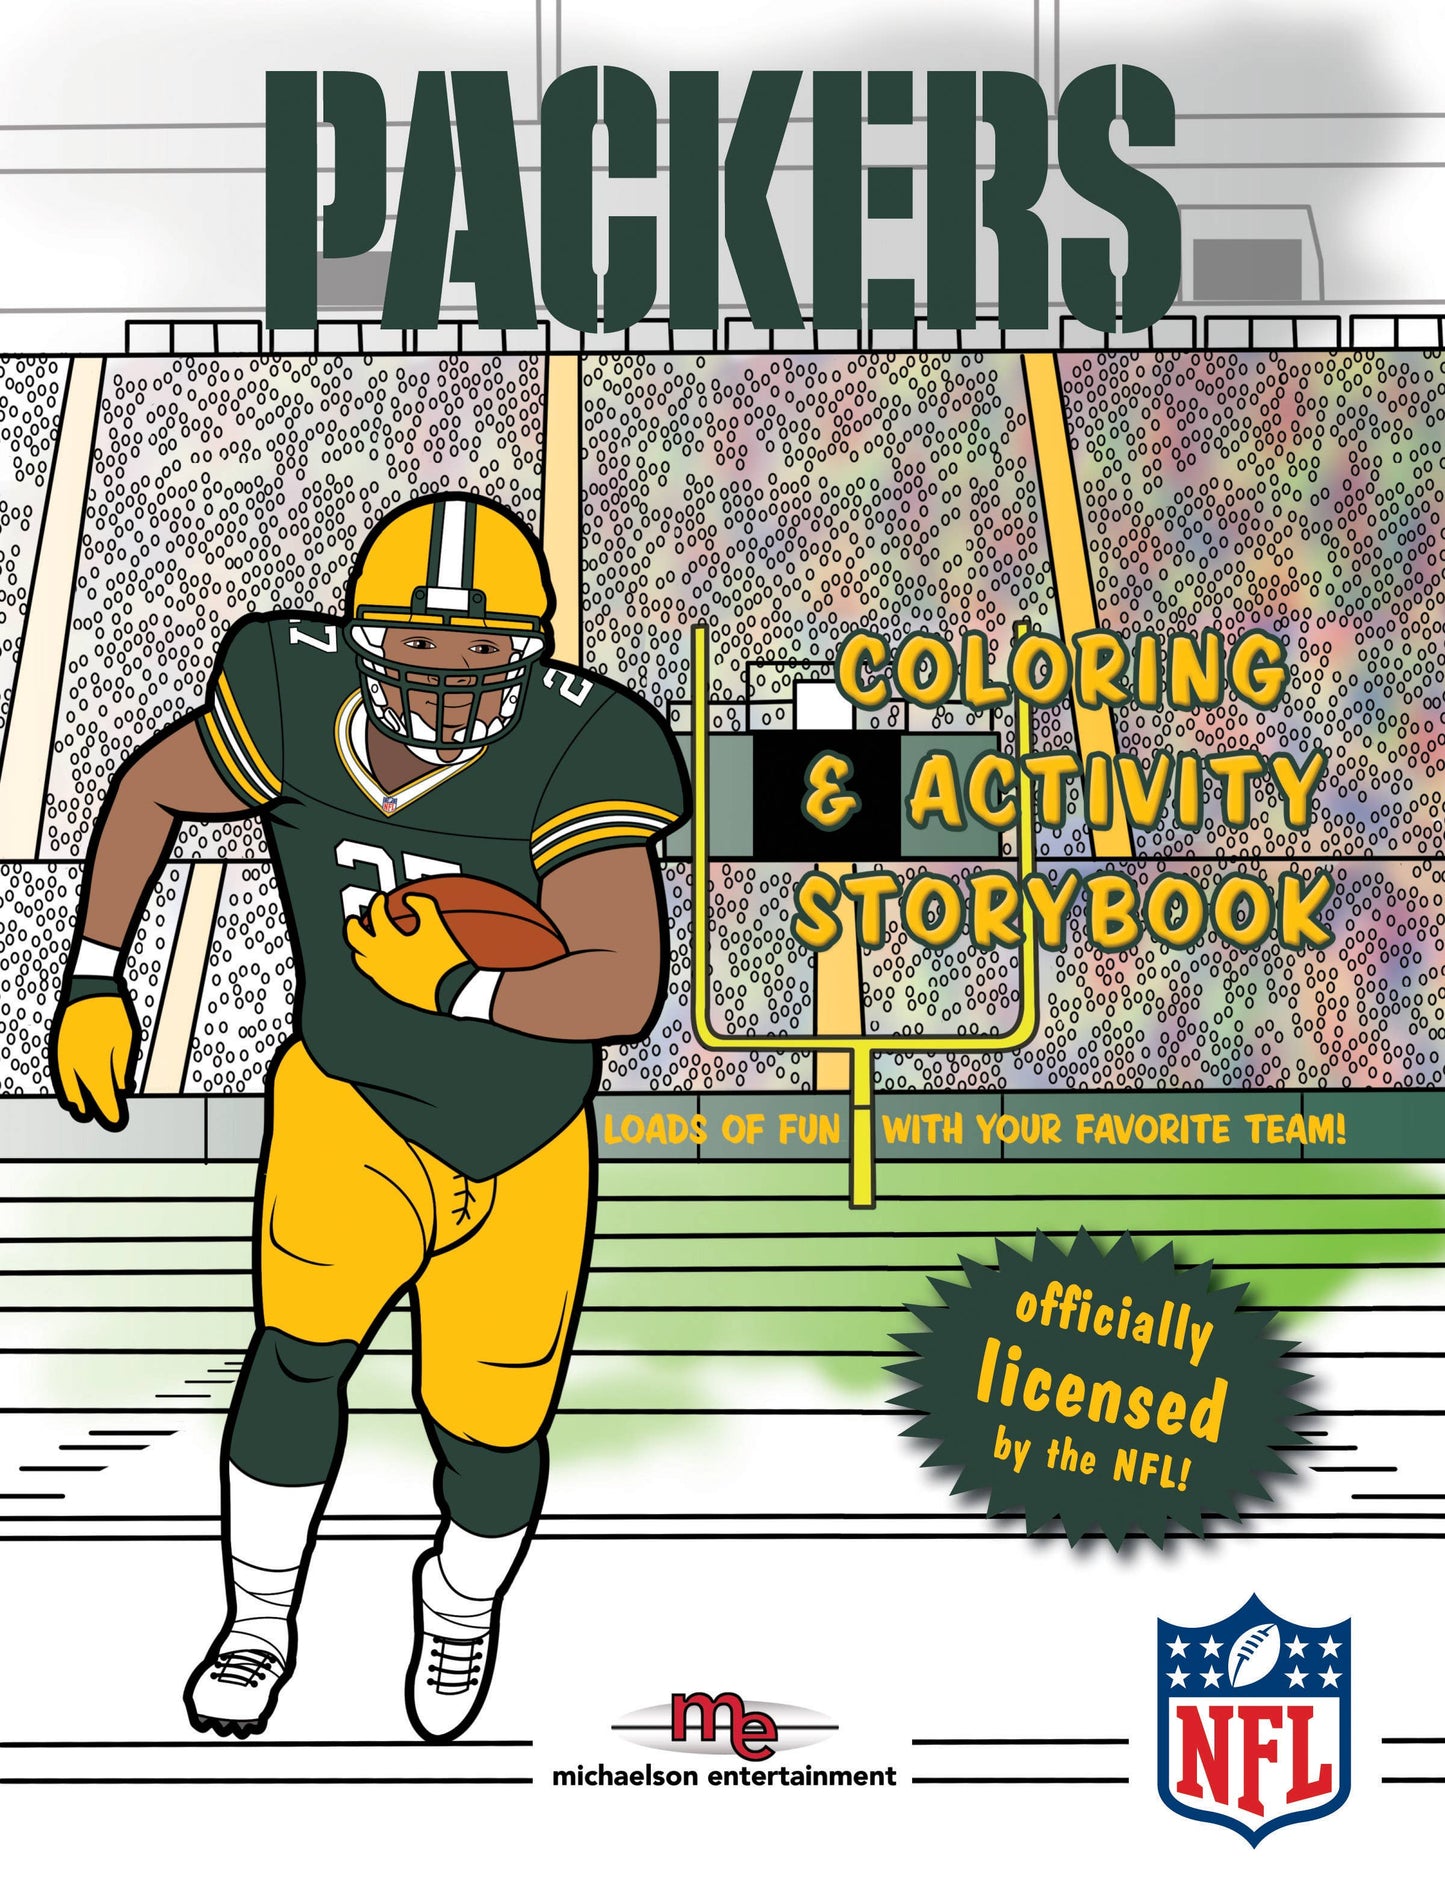 Michaelson Entertainment-Childrens Sports Board Books & Toys - Green Bay Packers Coloring & Activity